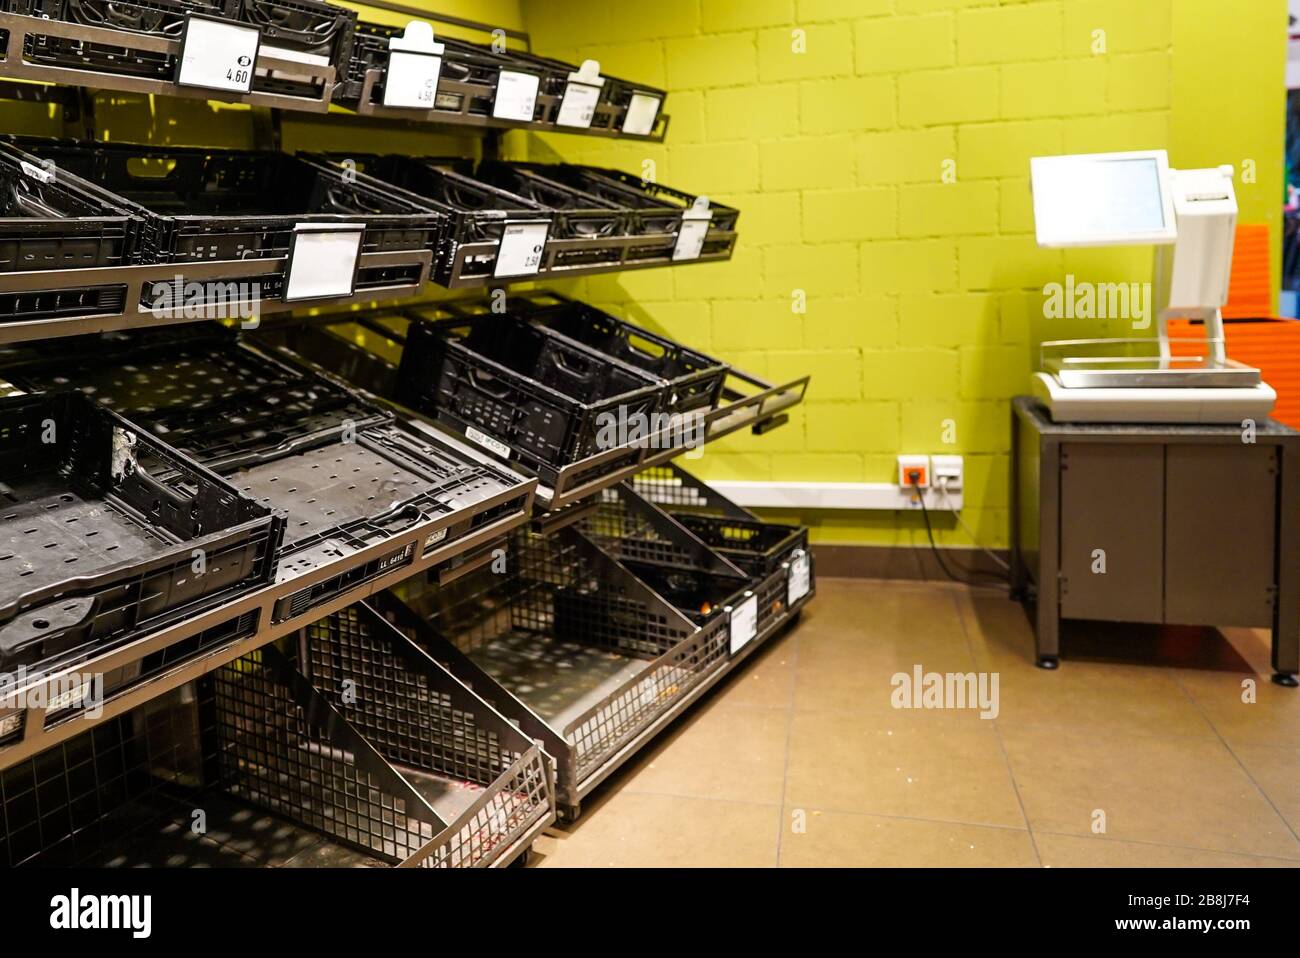 View of empty fruit and vegetable shelves in a European supermarket after buying food supplies because of Covid-19 Stock Photo